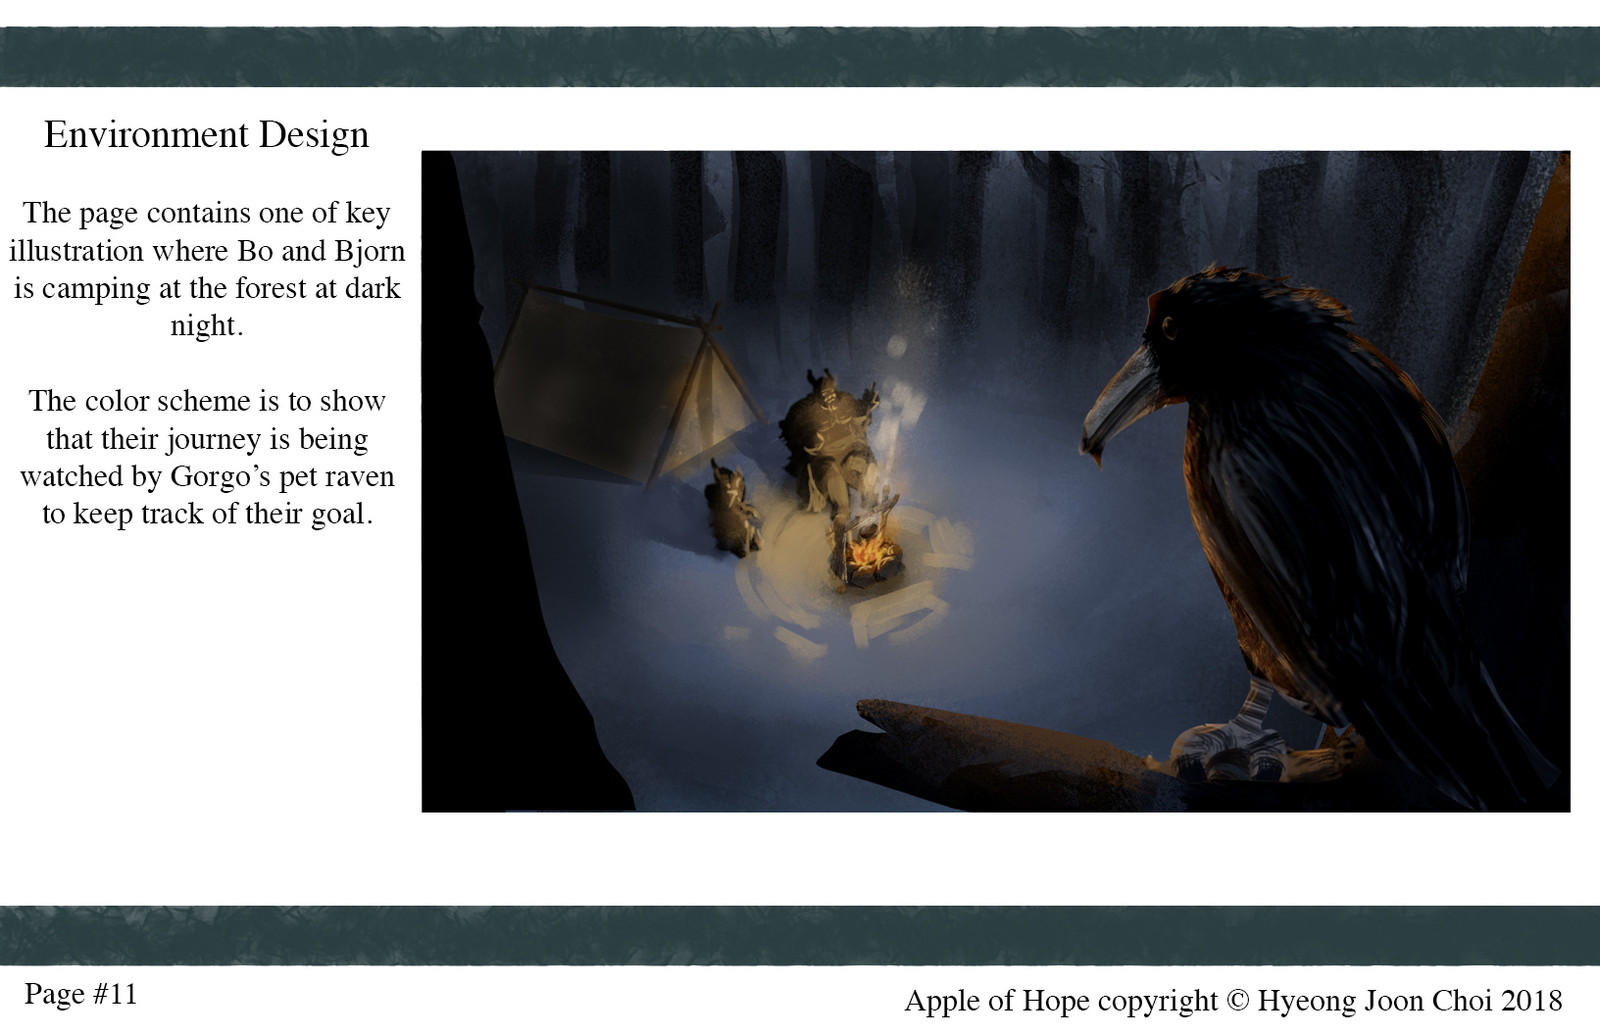 One of Environment Designs for Apple of Hope.